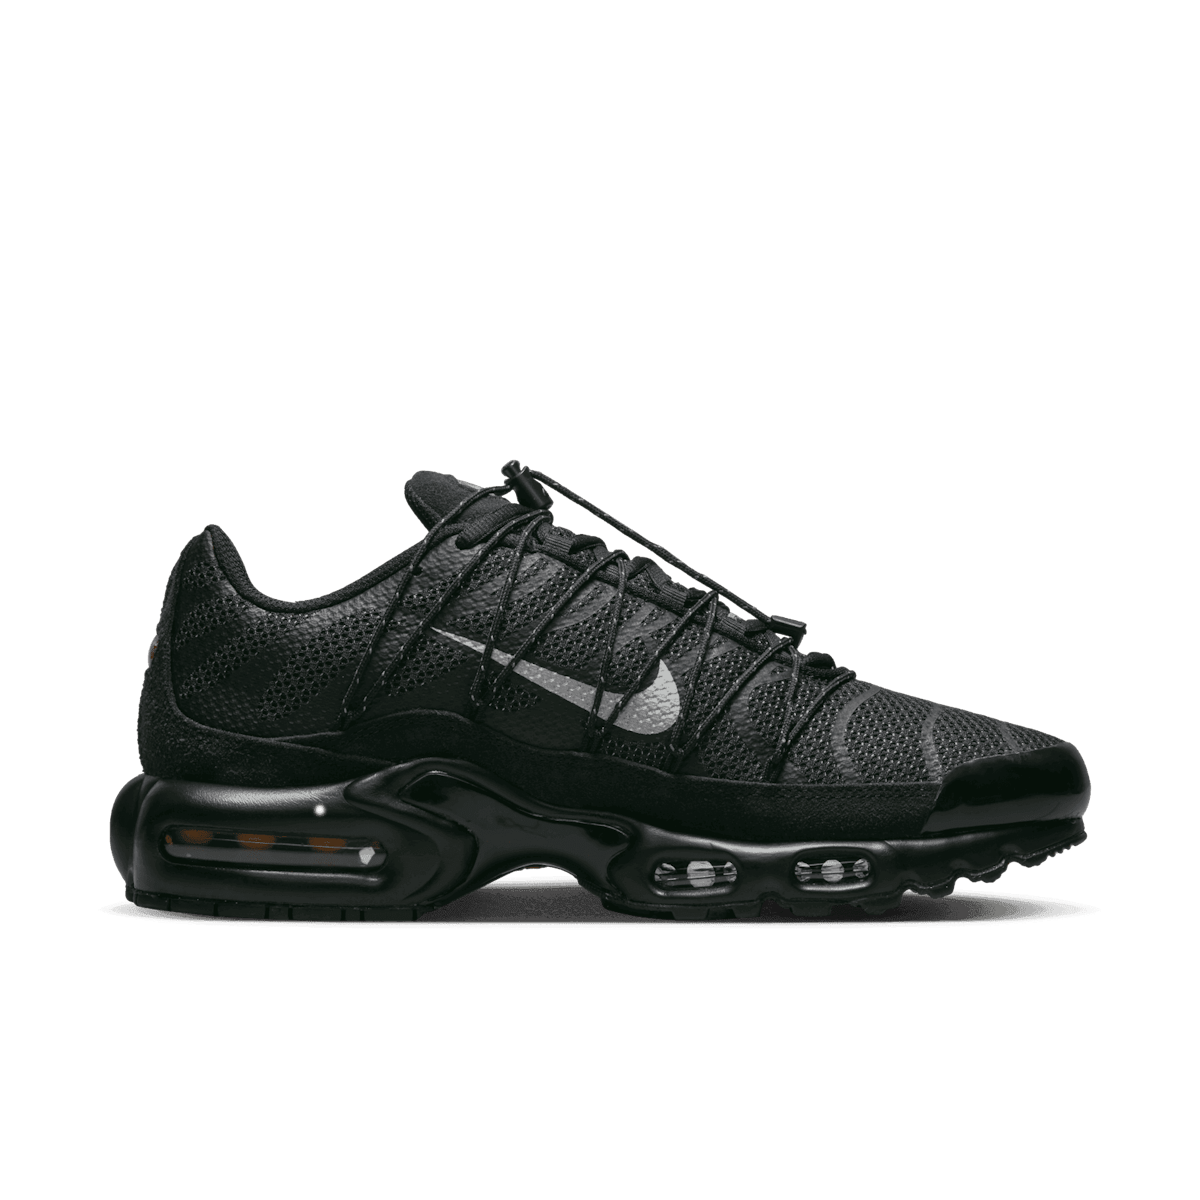 The Nike Air Max Plus Drift Appears in Black and Neon